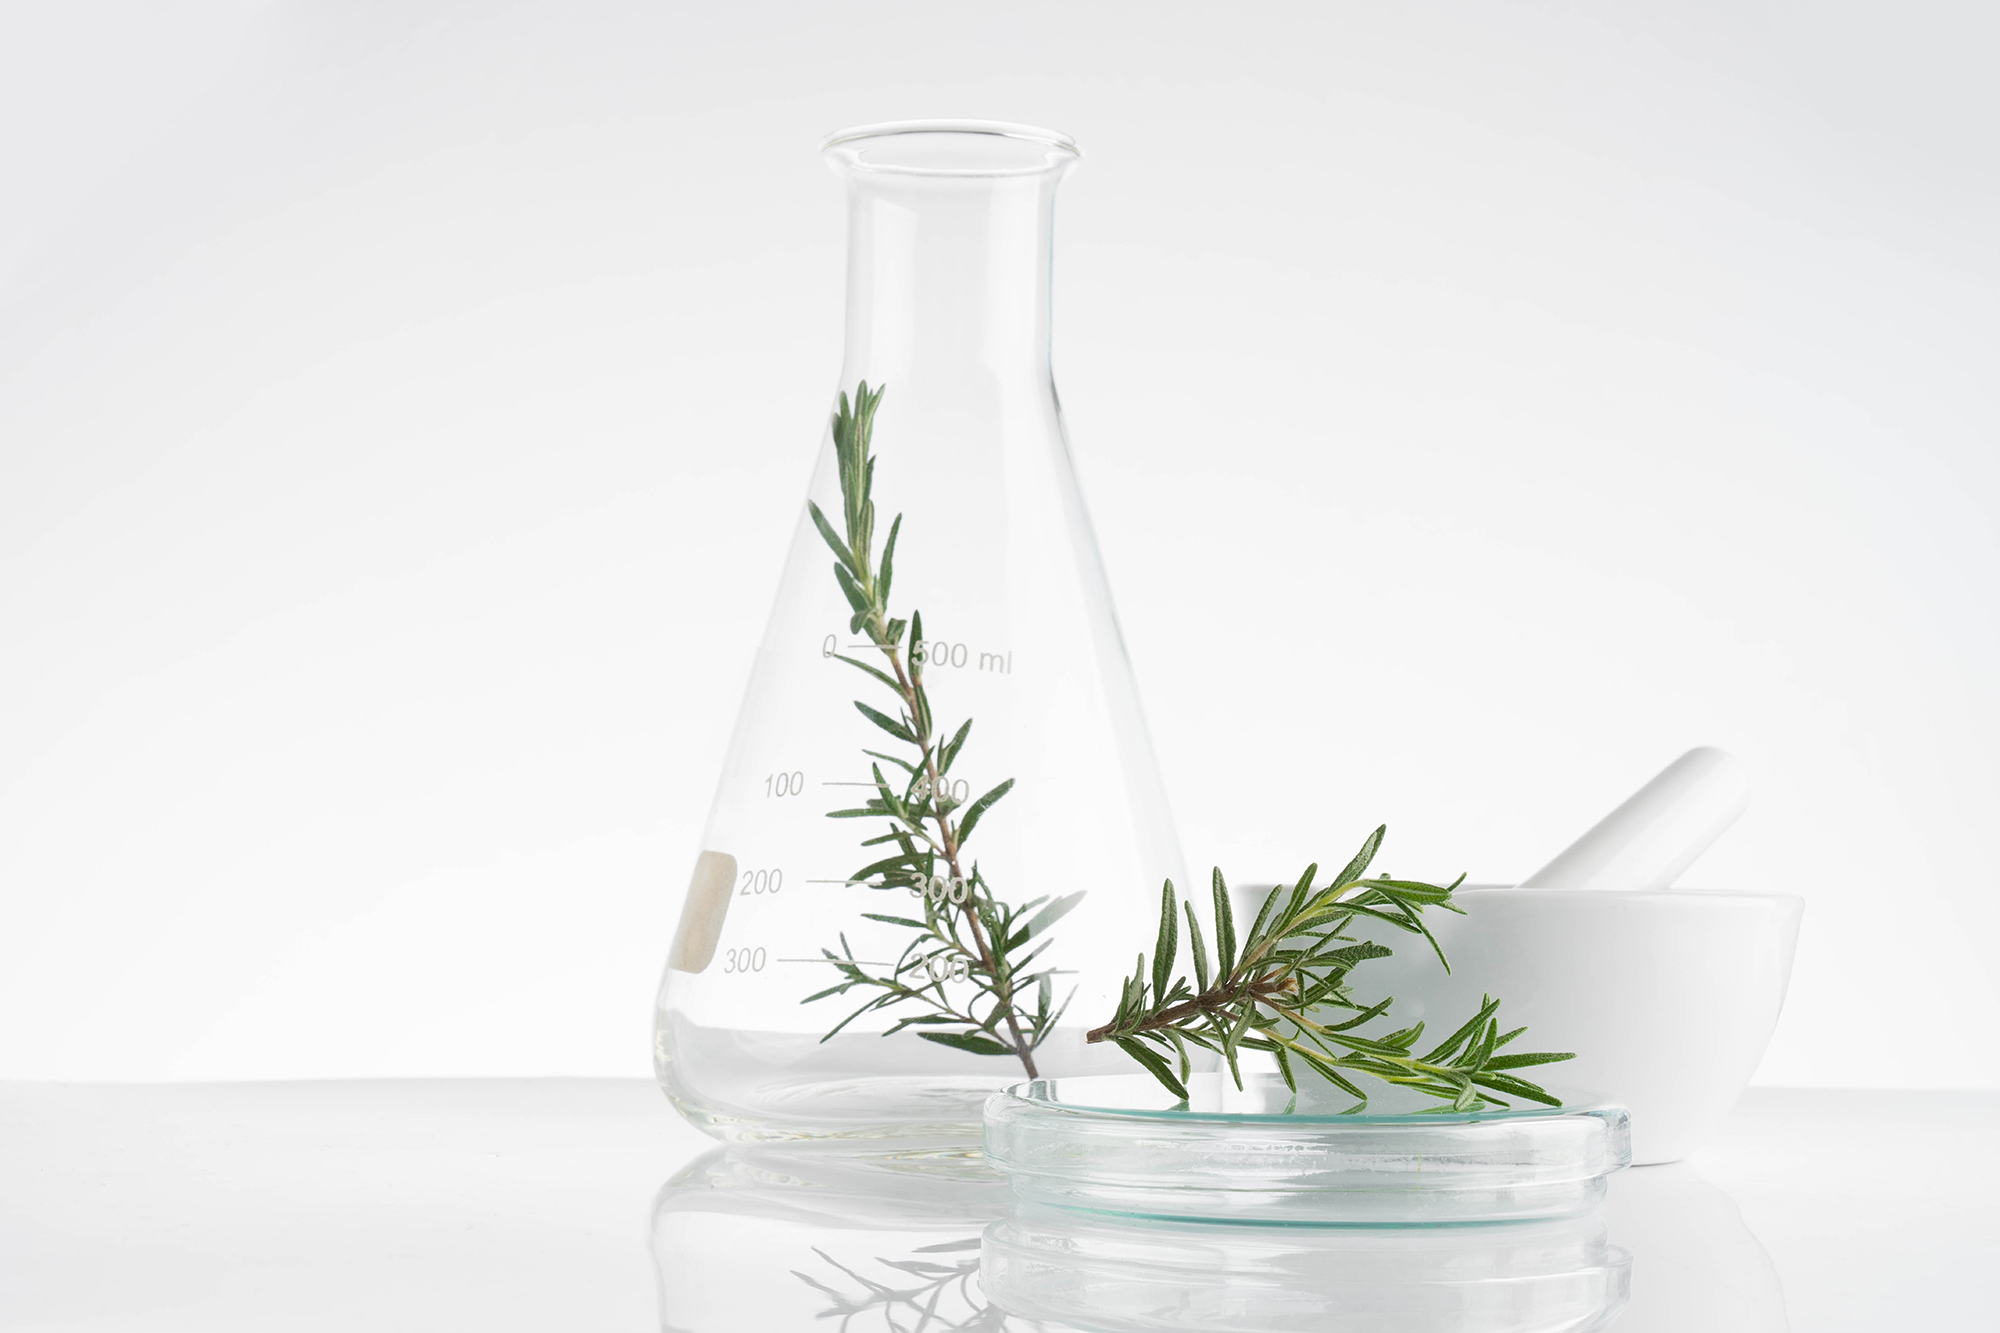 laboratory and research with alternative herb medicine natural skin care